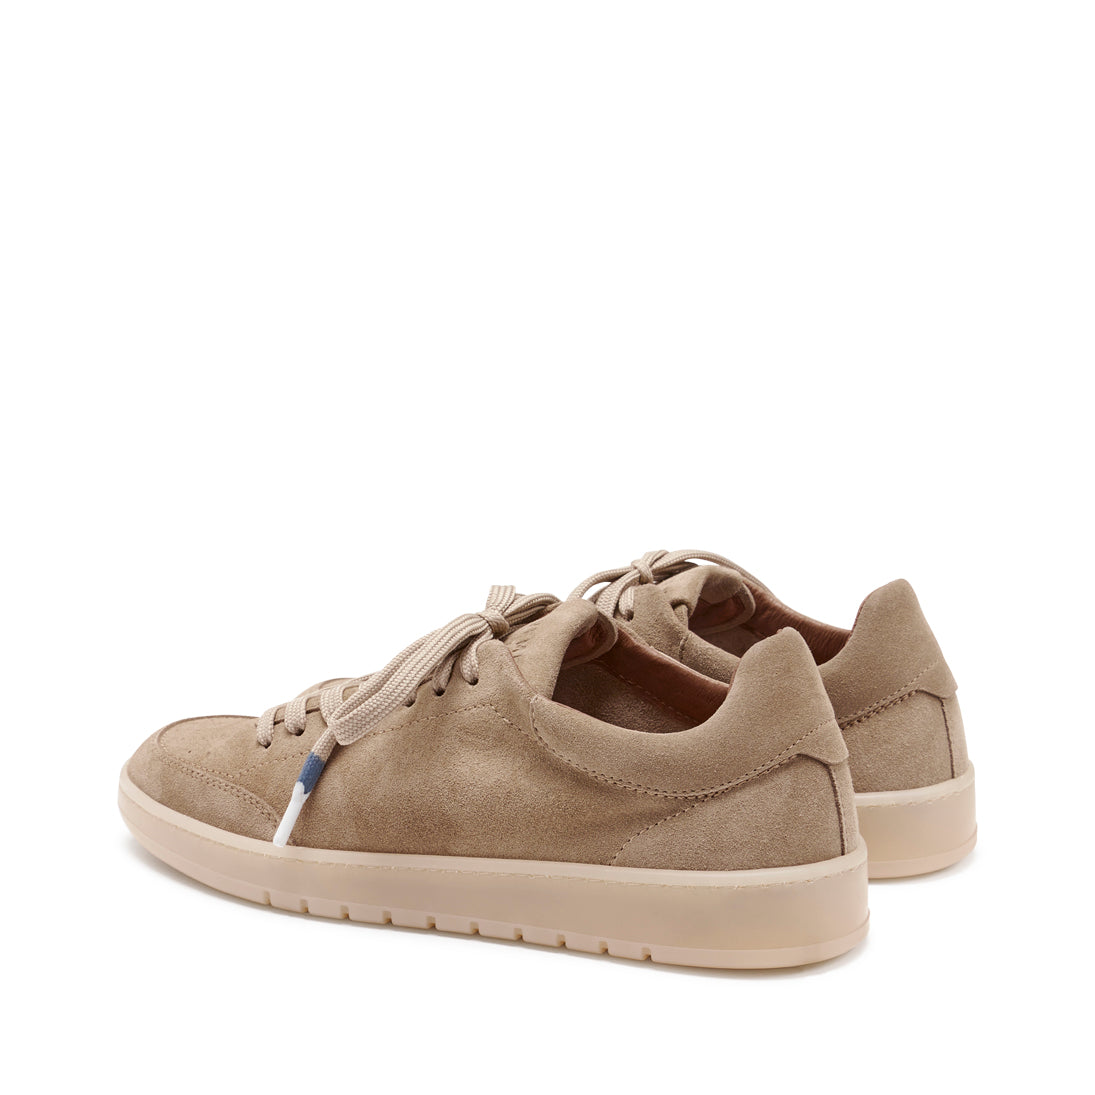 Pavement Men Justin Sneakers Taupe suede 174